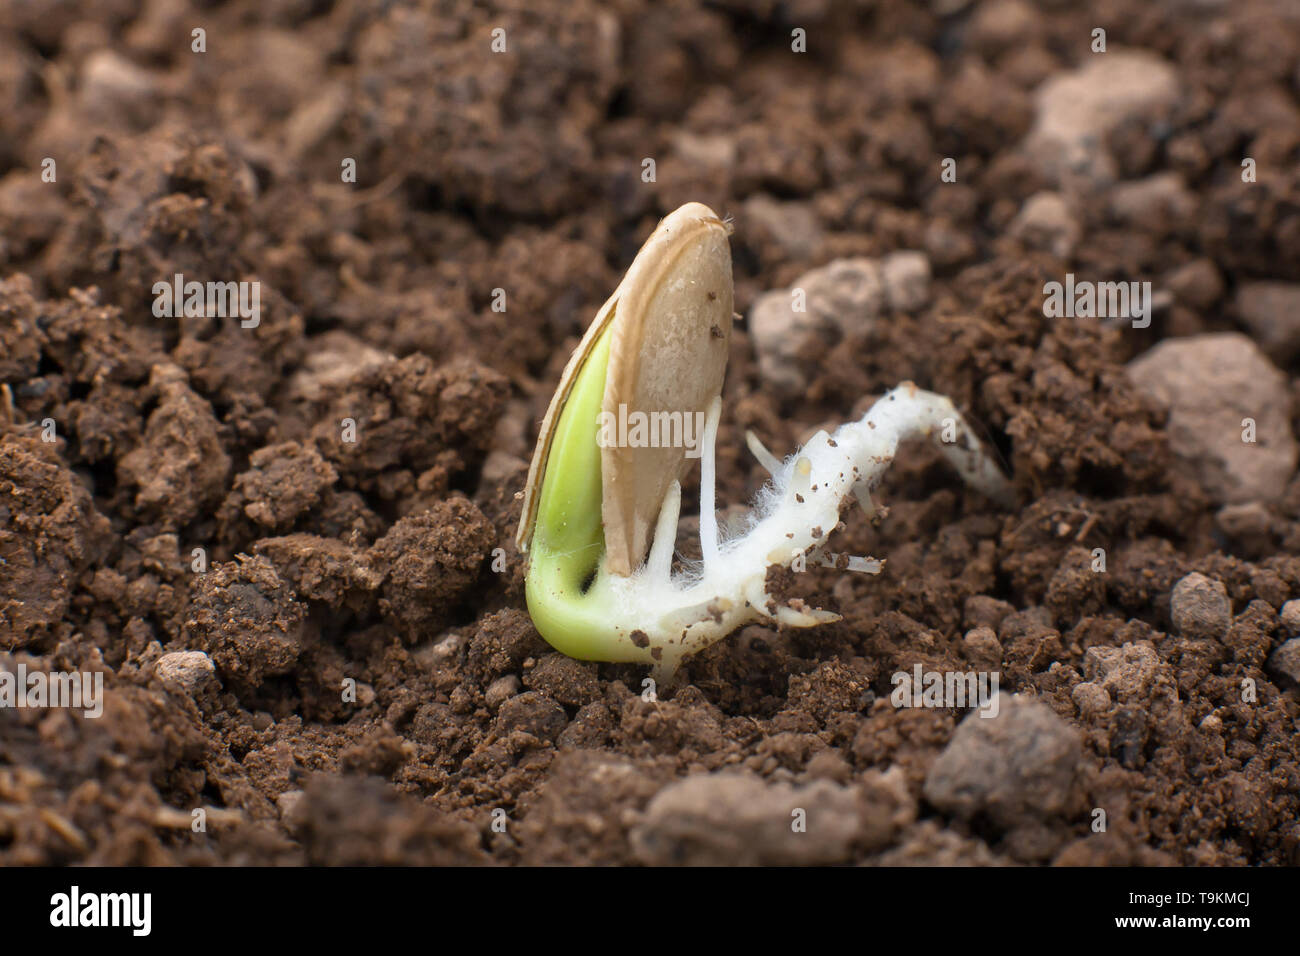 sprouted seed of marrow on the soil in the vegetable garden, closeup Stock Photo